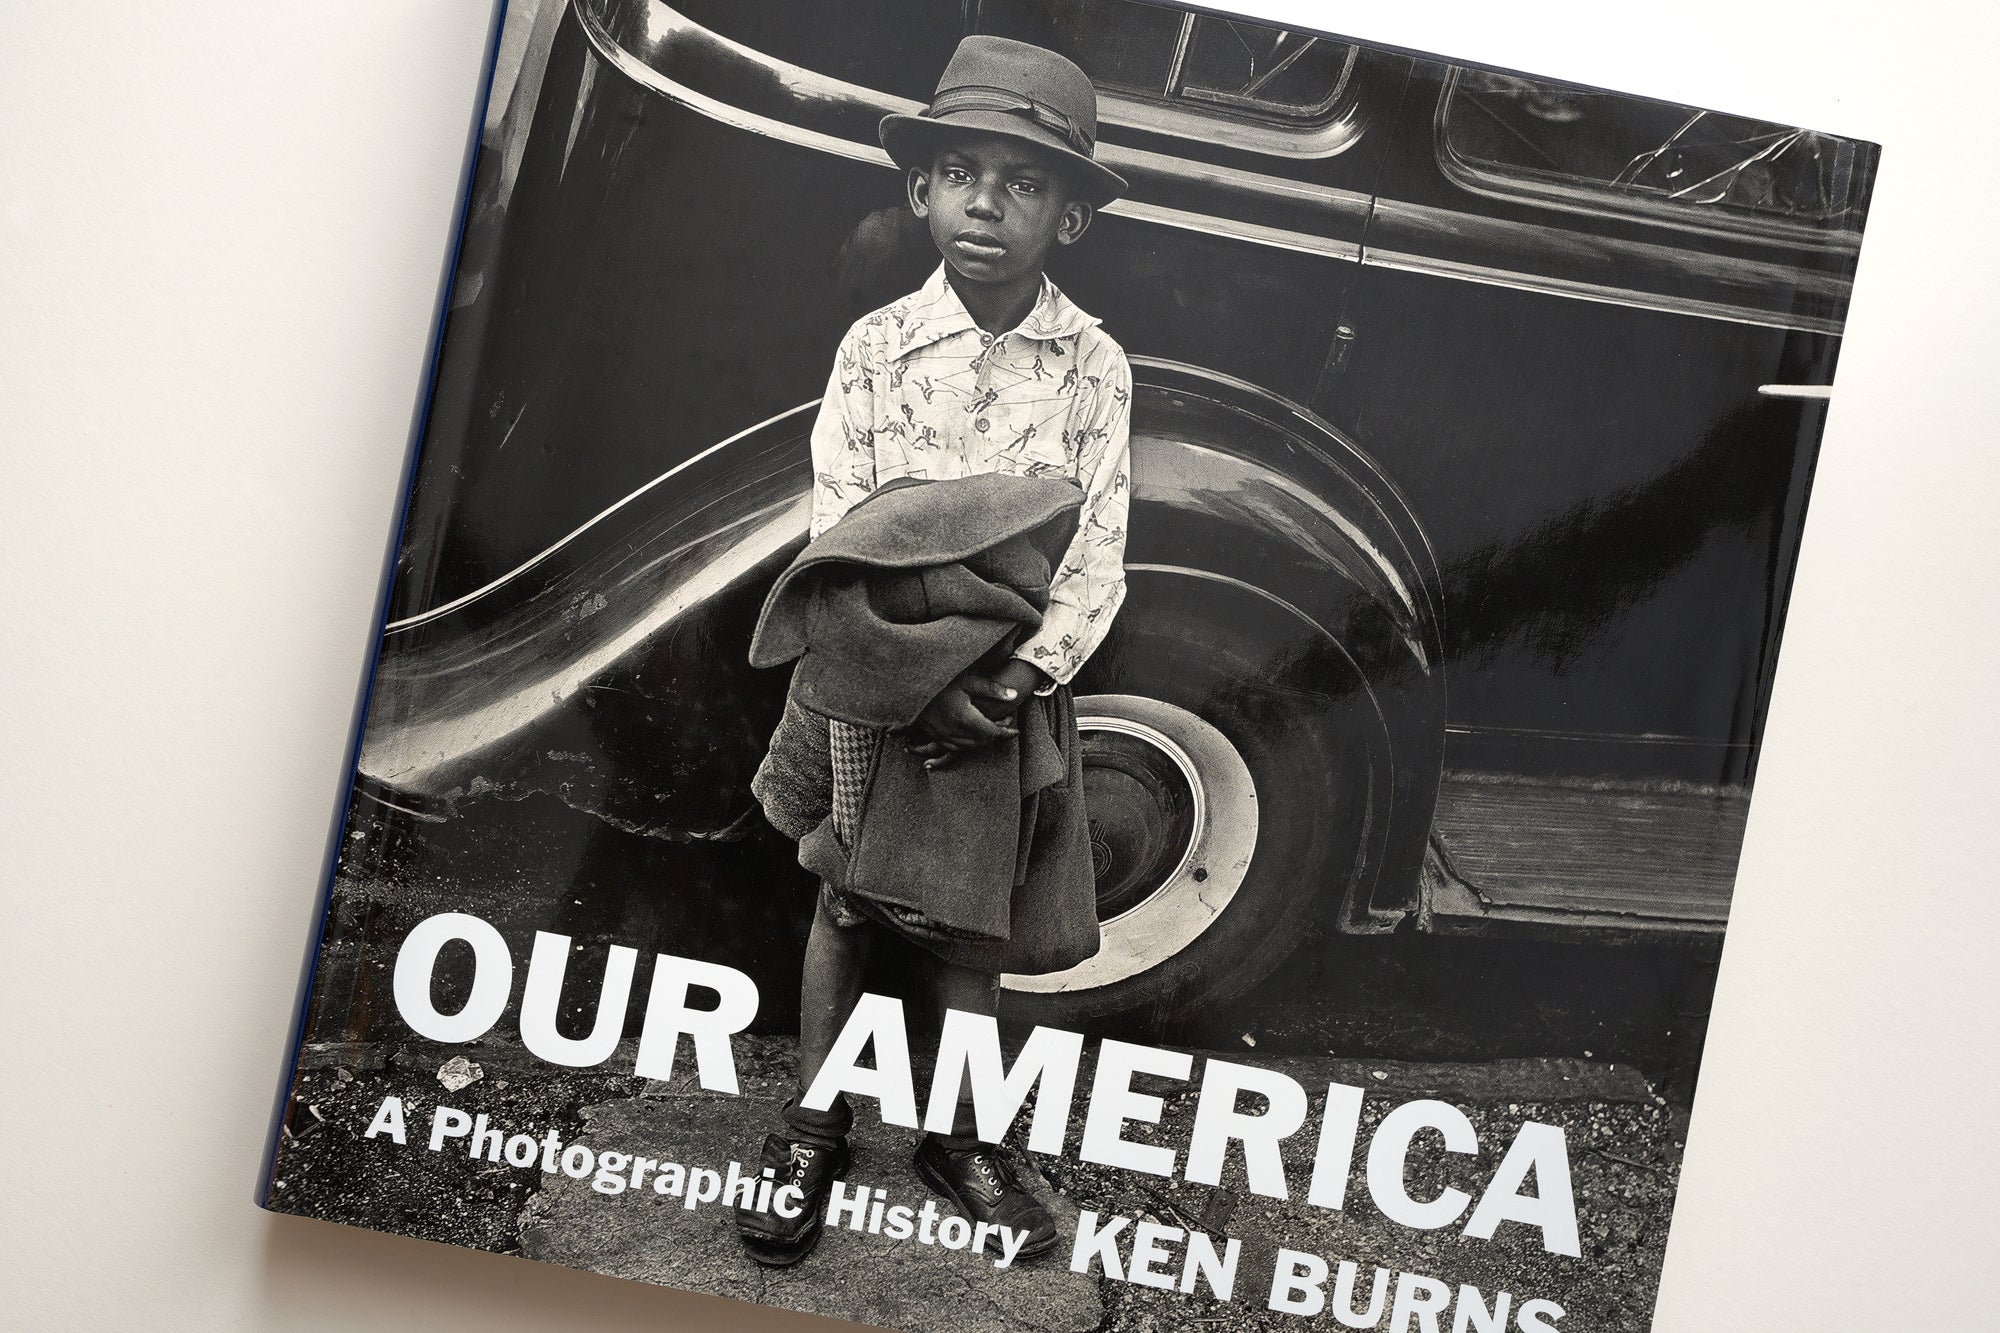 The cover of "Our America: A Photographic History" by Ken Burns features a photograph made by one of Burns' former teachers.